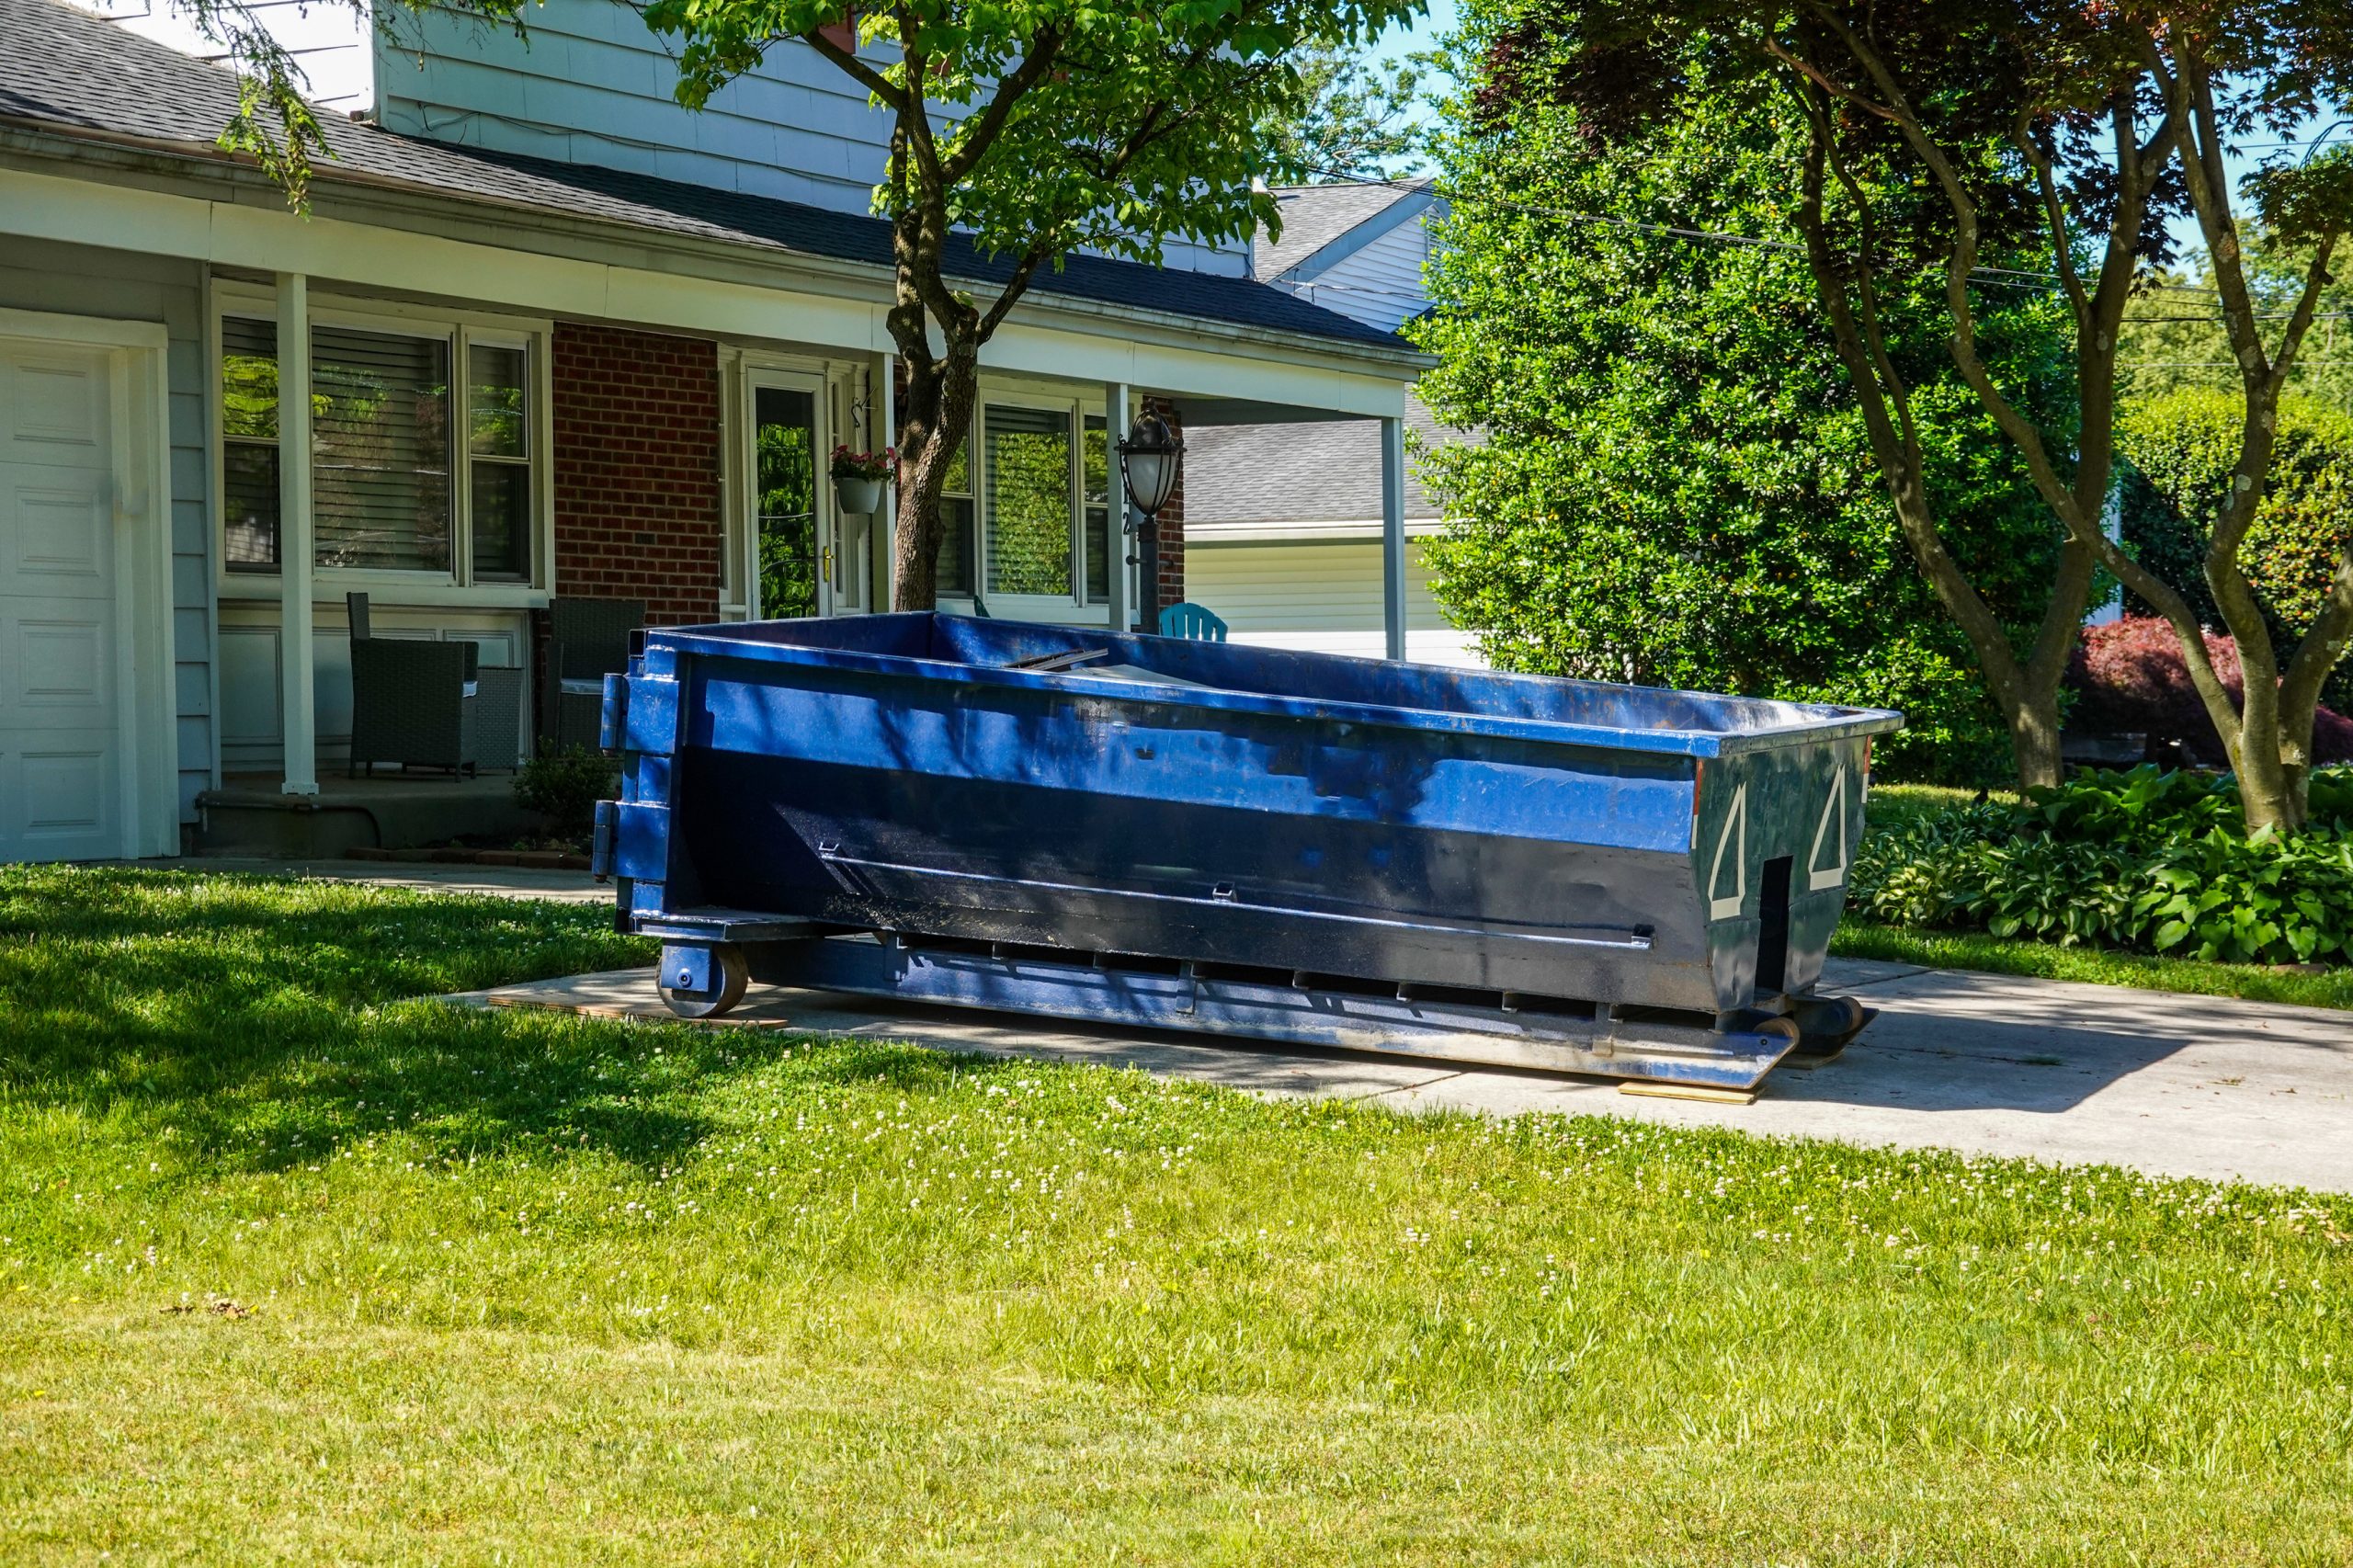 A small blue RoRo in the driveway of a house in a residential neighbourhood